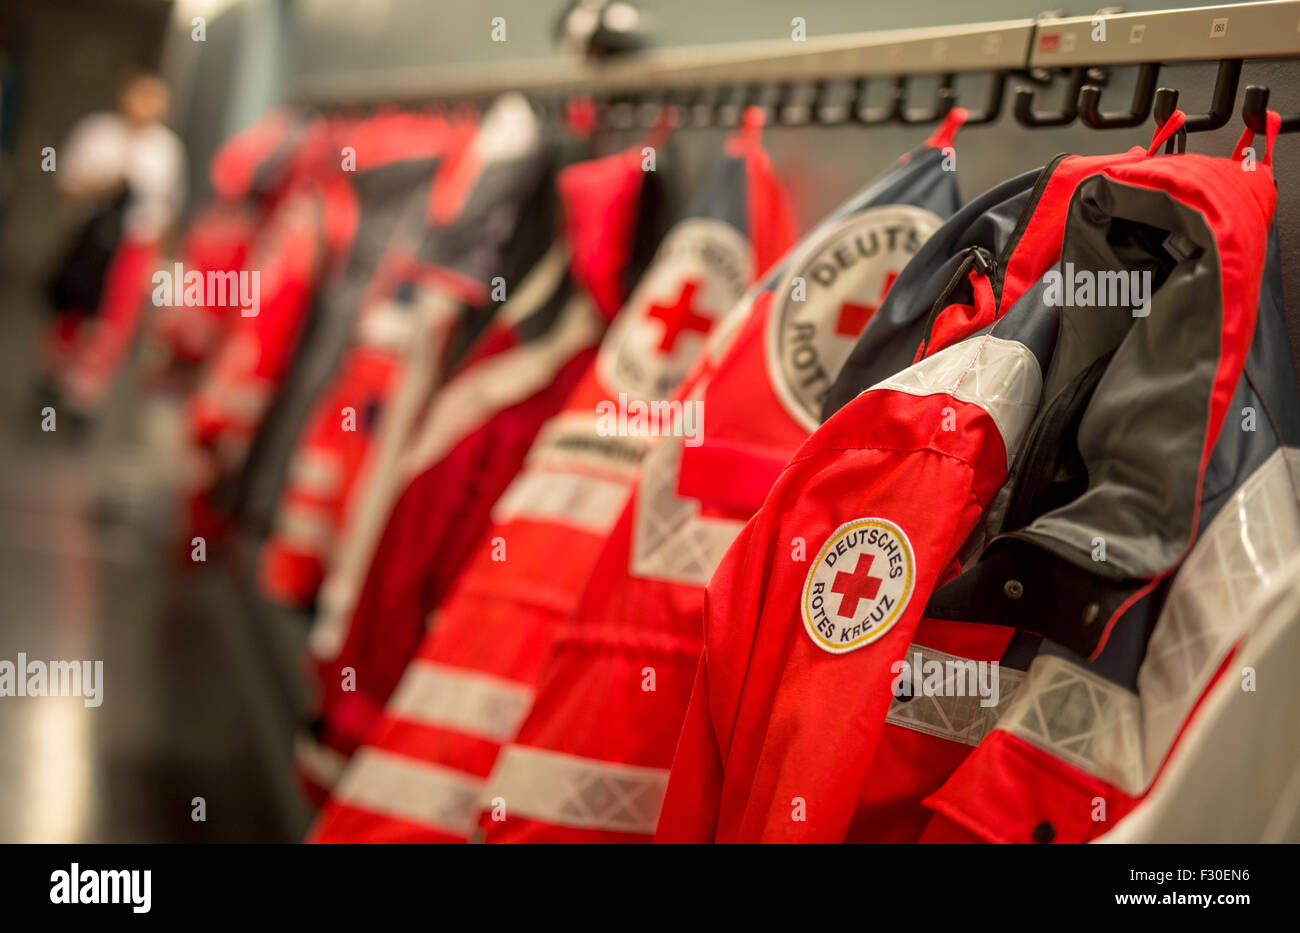 Munich, Germany. 23rd Sep, 2015. Jackets of paramedics of the German Red Cross hanging on coat hooks at the first-aid station at the 182nd Oktoberfest in Munich, Germany, 23 September 2015. 8,000 patients were treated at the station run by the German Red Cross last year, with 680 of them suffering from alcohol poisoning. The world's largest beer festival which will run until 04 October 2015 is expected to attract some six million visitors from all over the world this year. Photo: MATTHIAS BALK/dpa/Alamy Live News Stock Photo